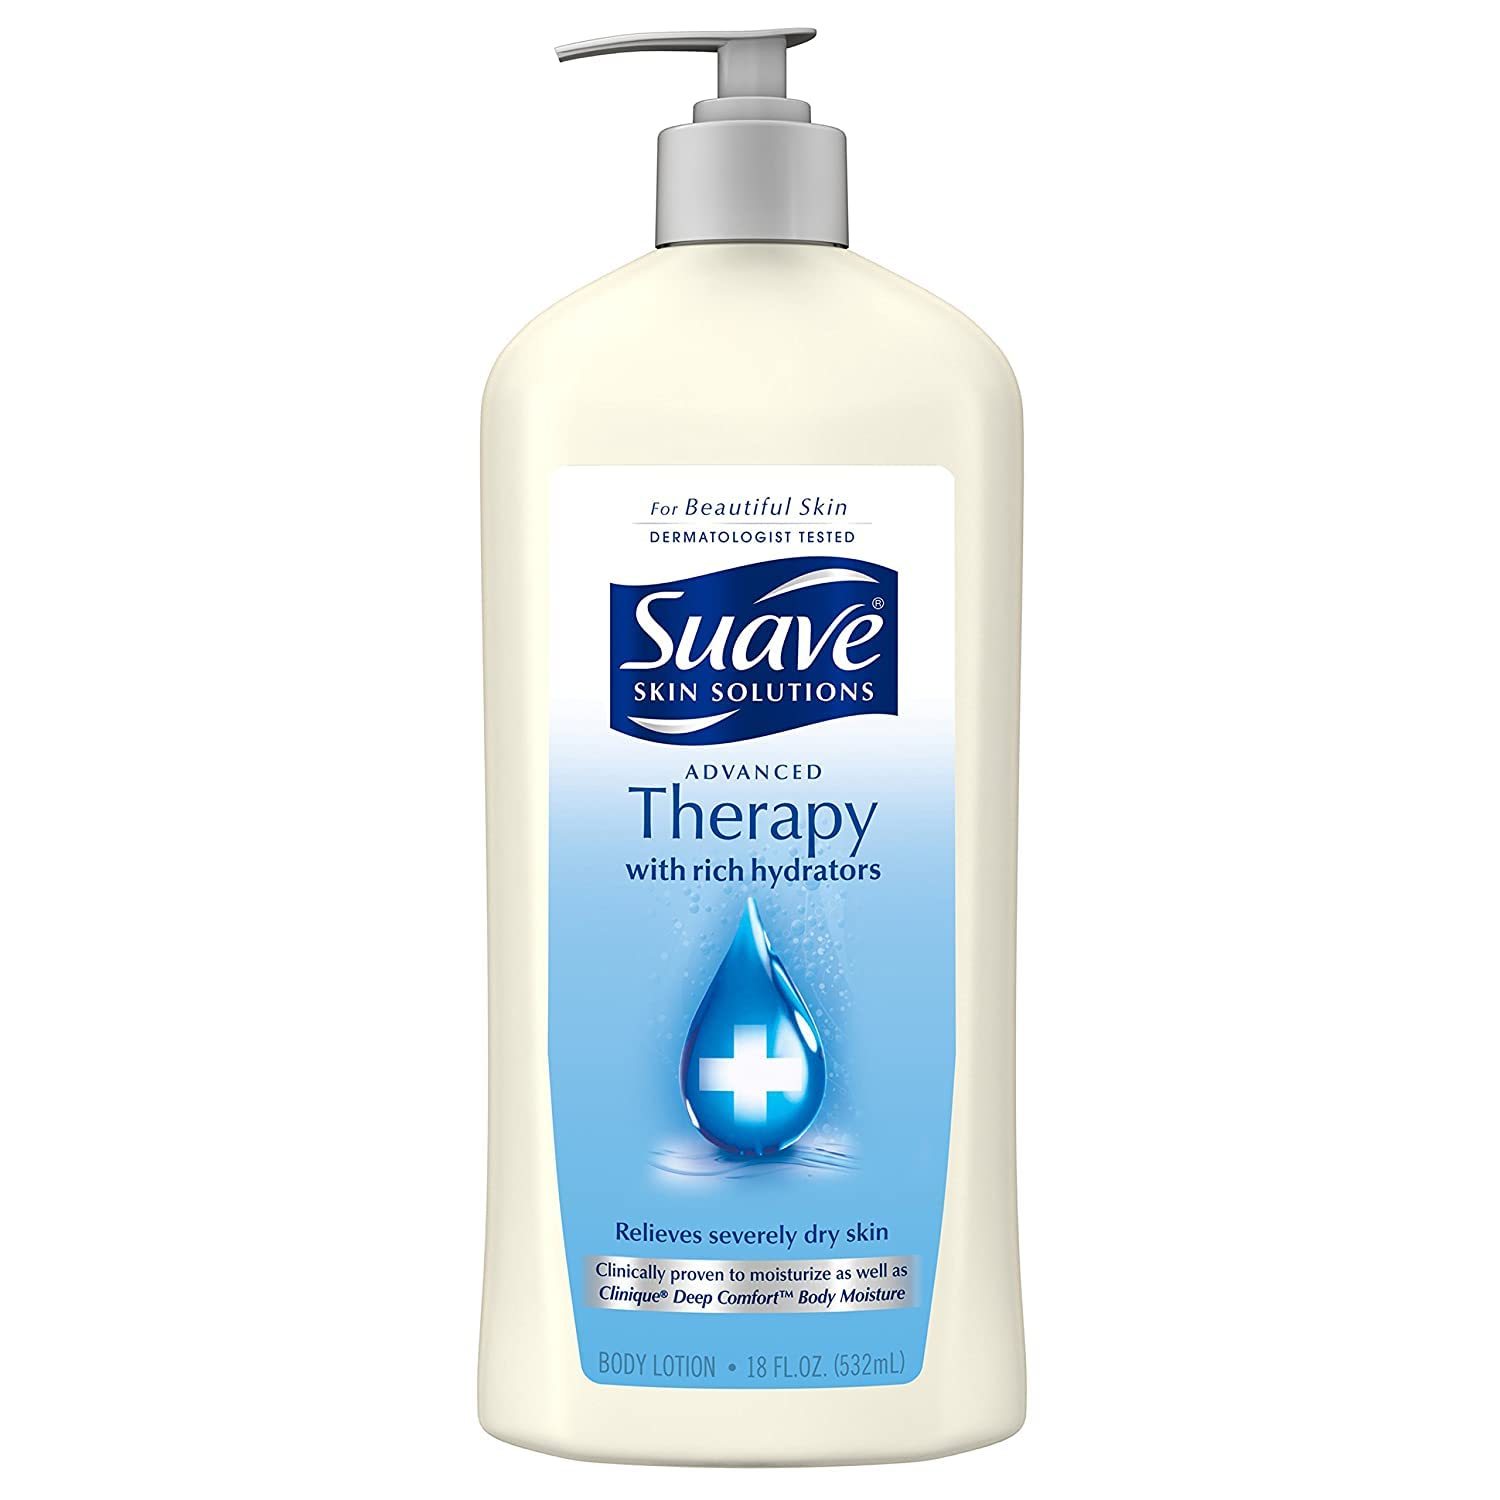 Suave Skin Lotion 18 Ounce Pump Advanced Therapy Hydrators (532ml) (2 Pack) - $34.99